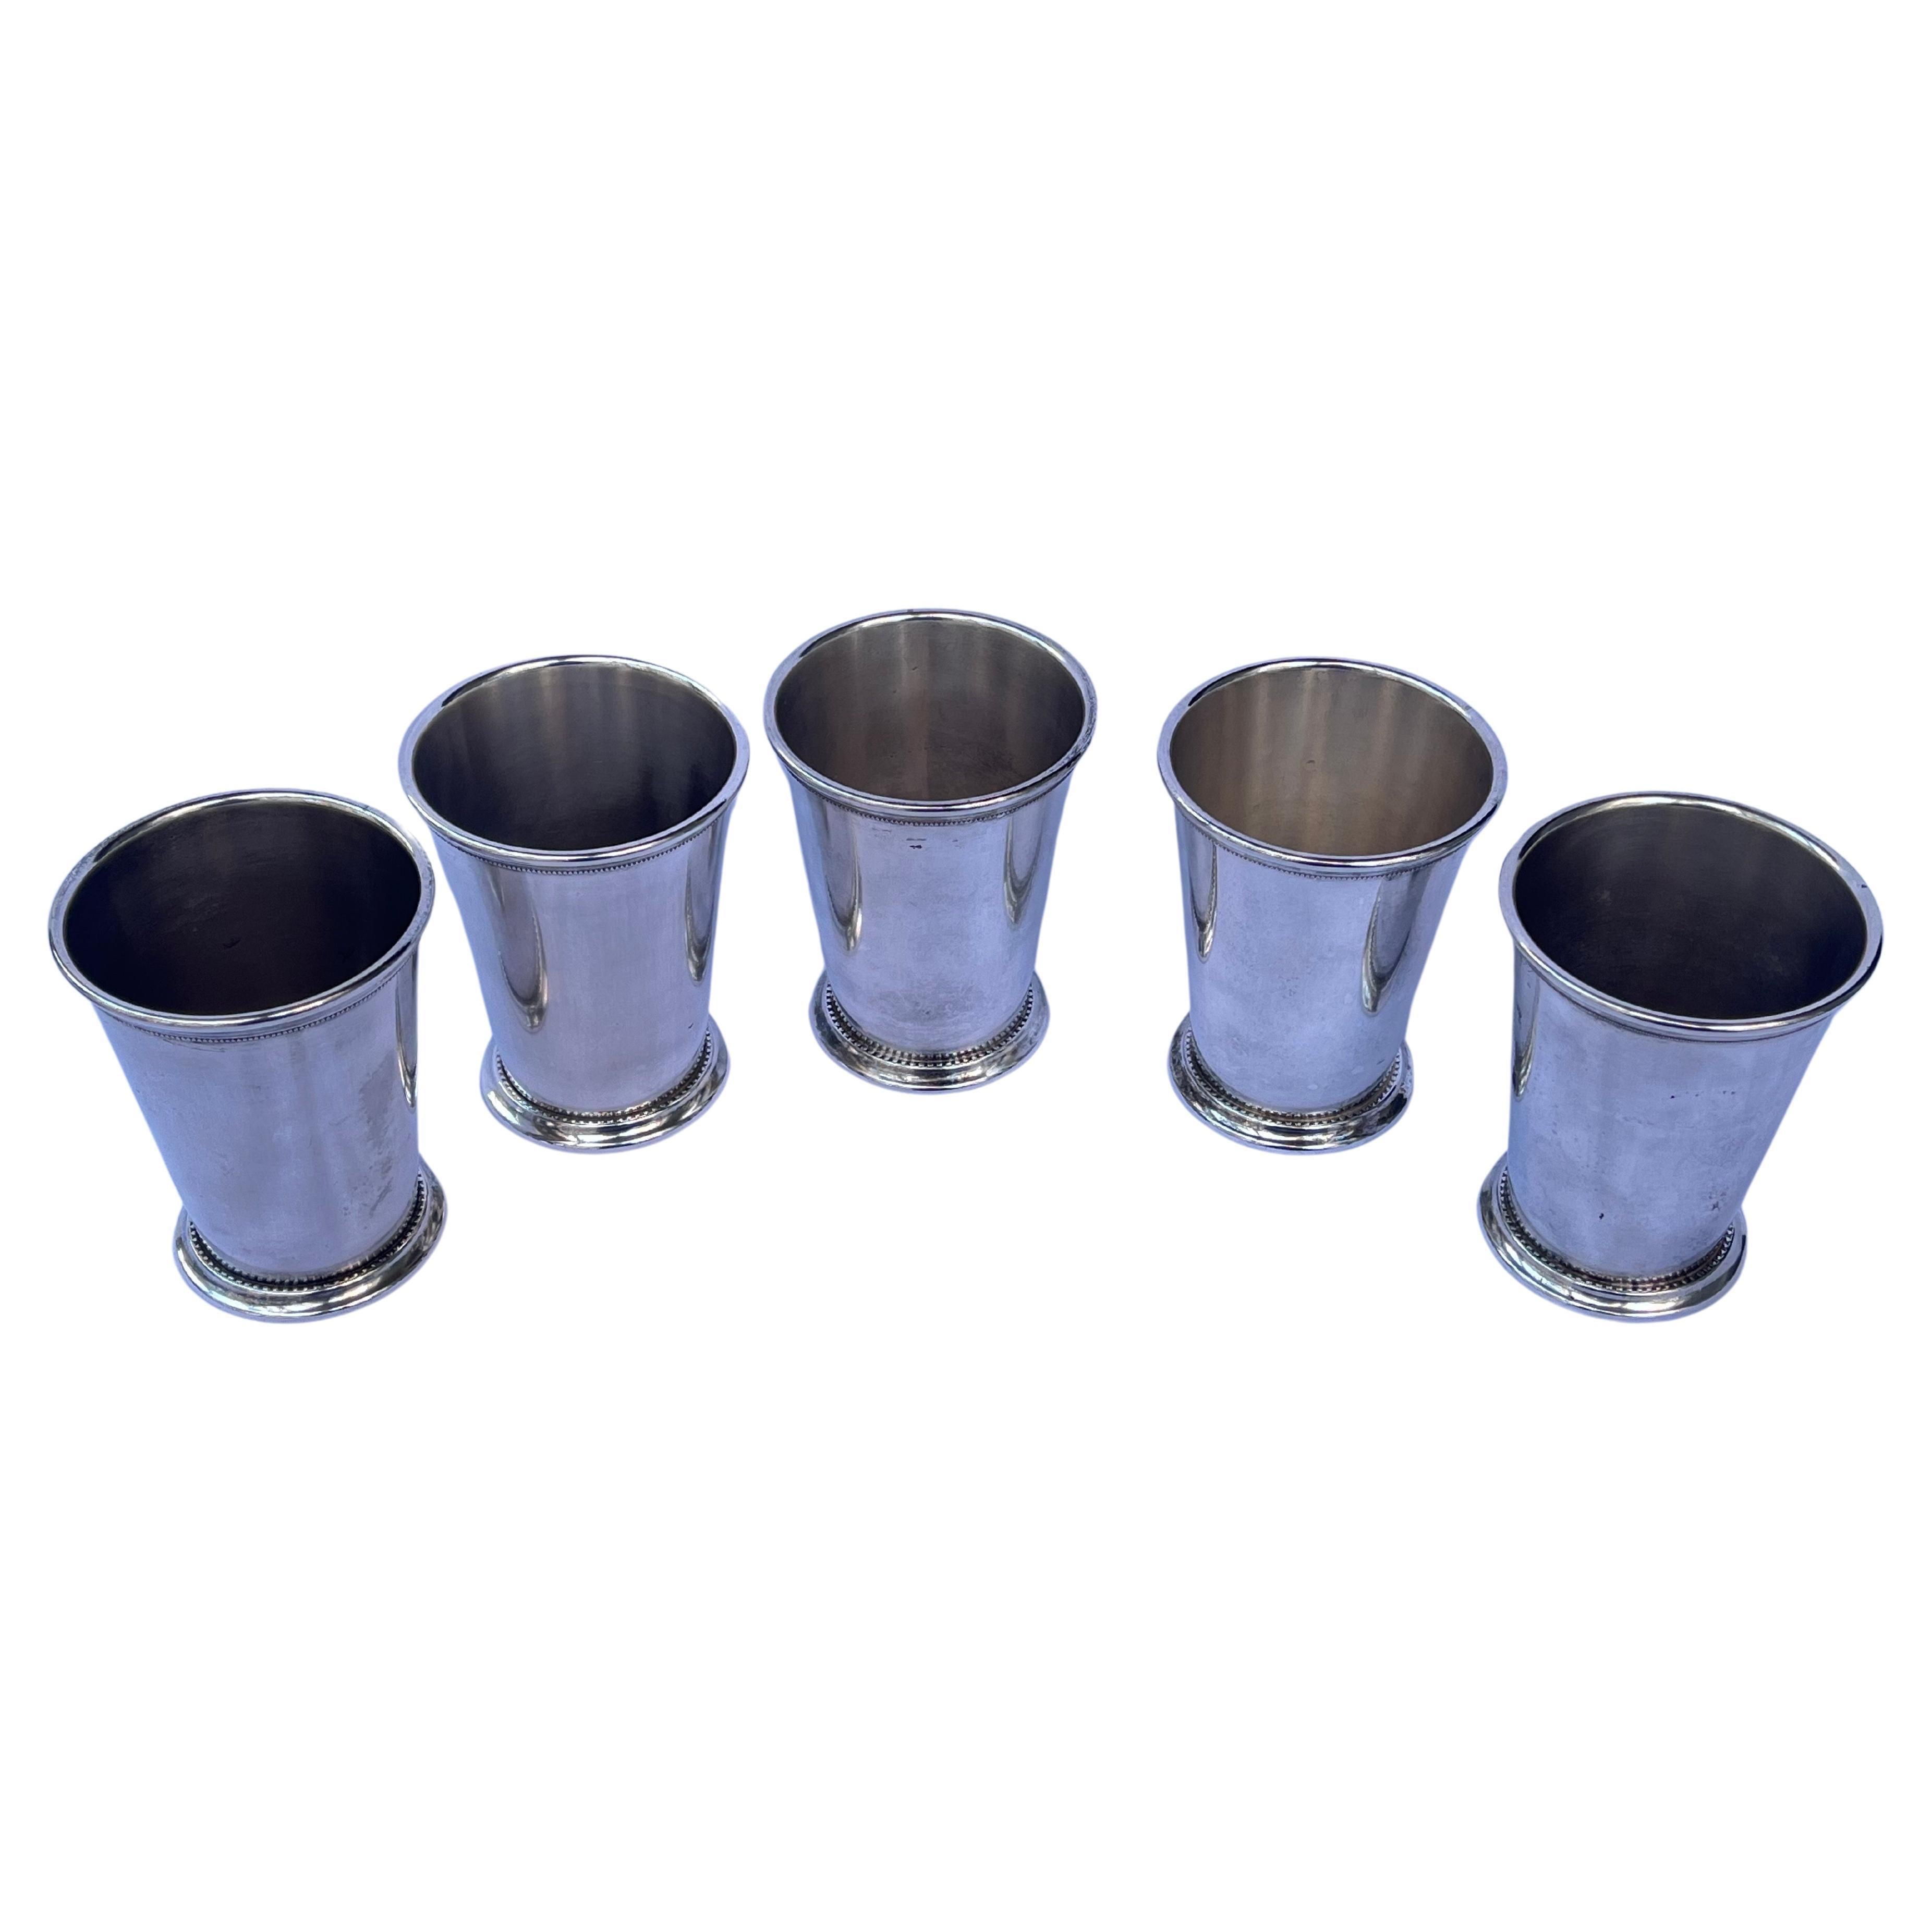 A vintage assembled set of five Italian made Patrick Henry Mint Julep Cups. This vintage set of five cups is the perfect addition to your home bar for everyday cocktails, not just the Mint Julep on May 7th for the Kentucky Derby! But if you'd like